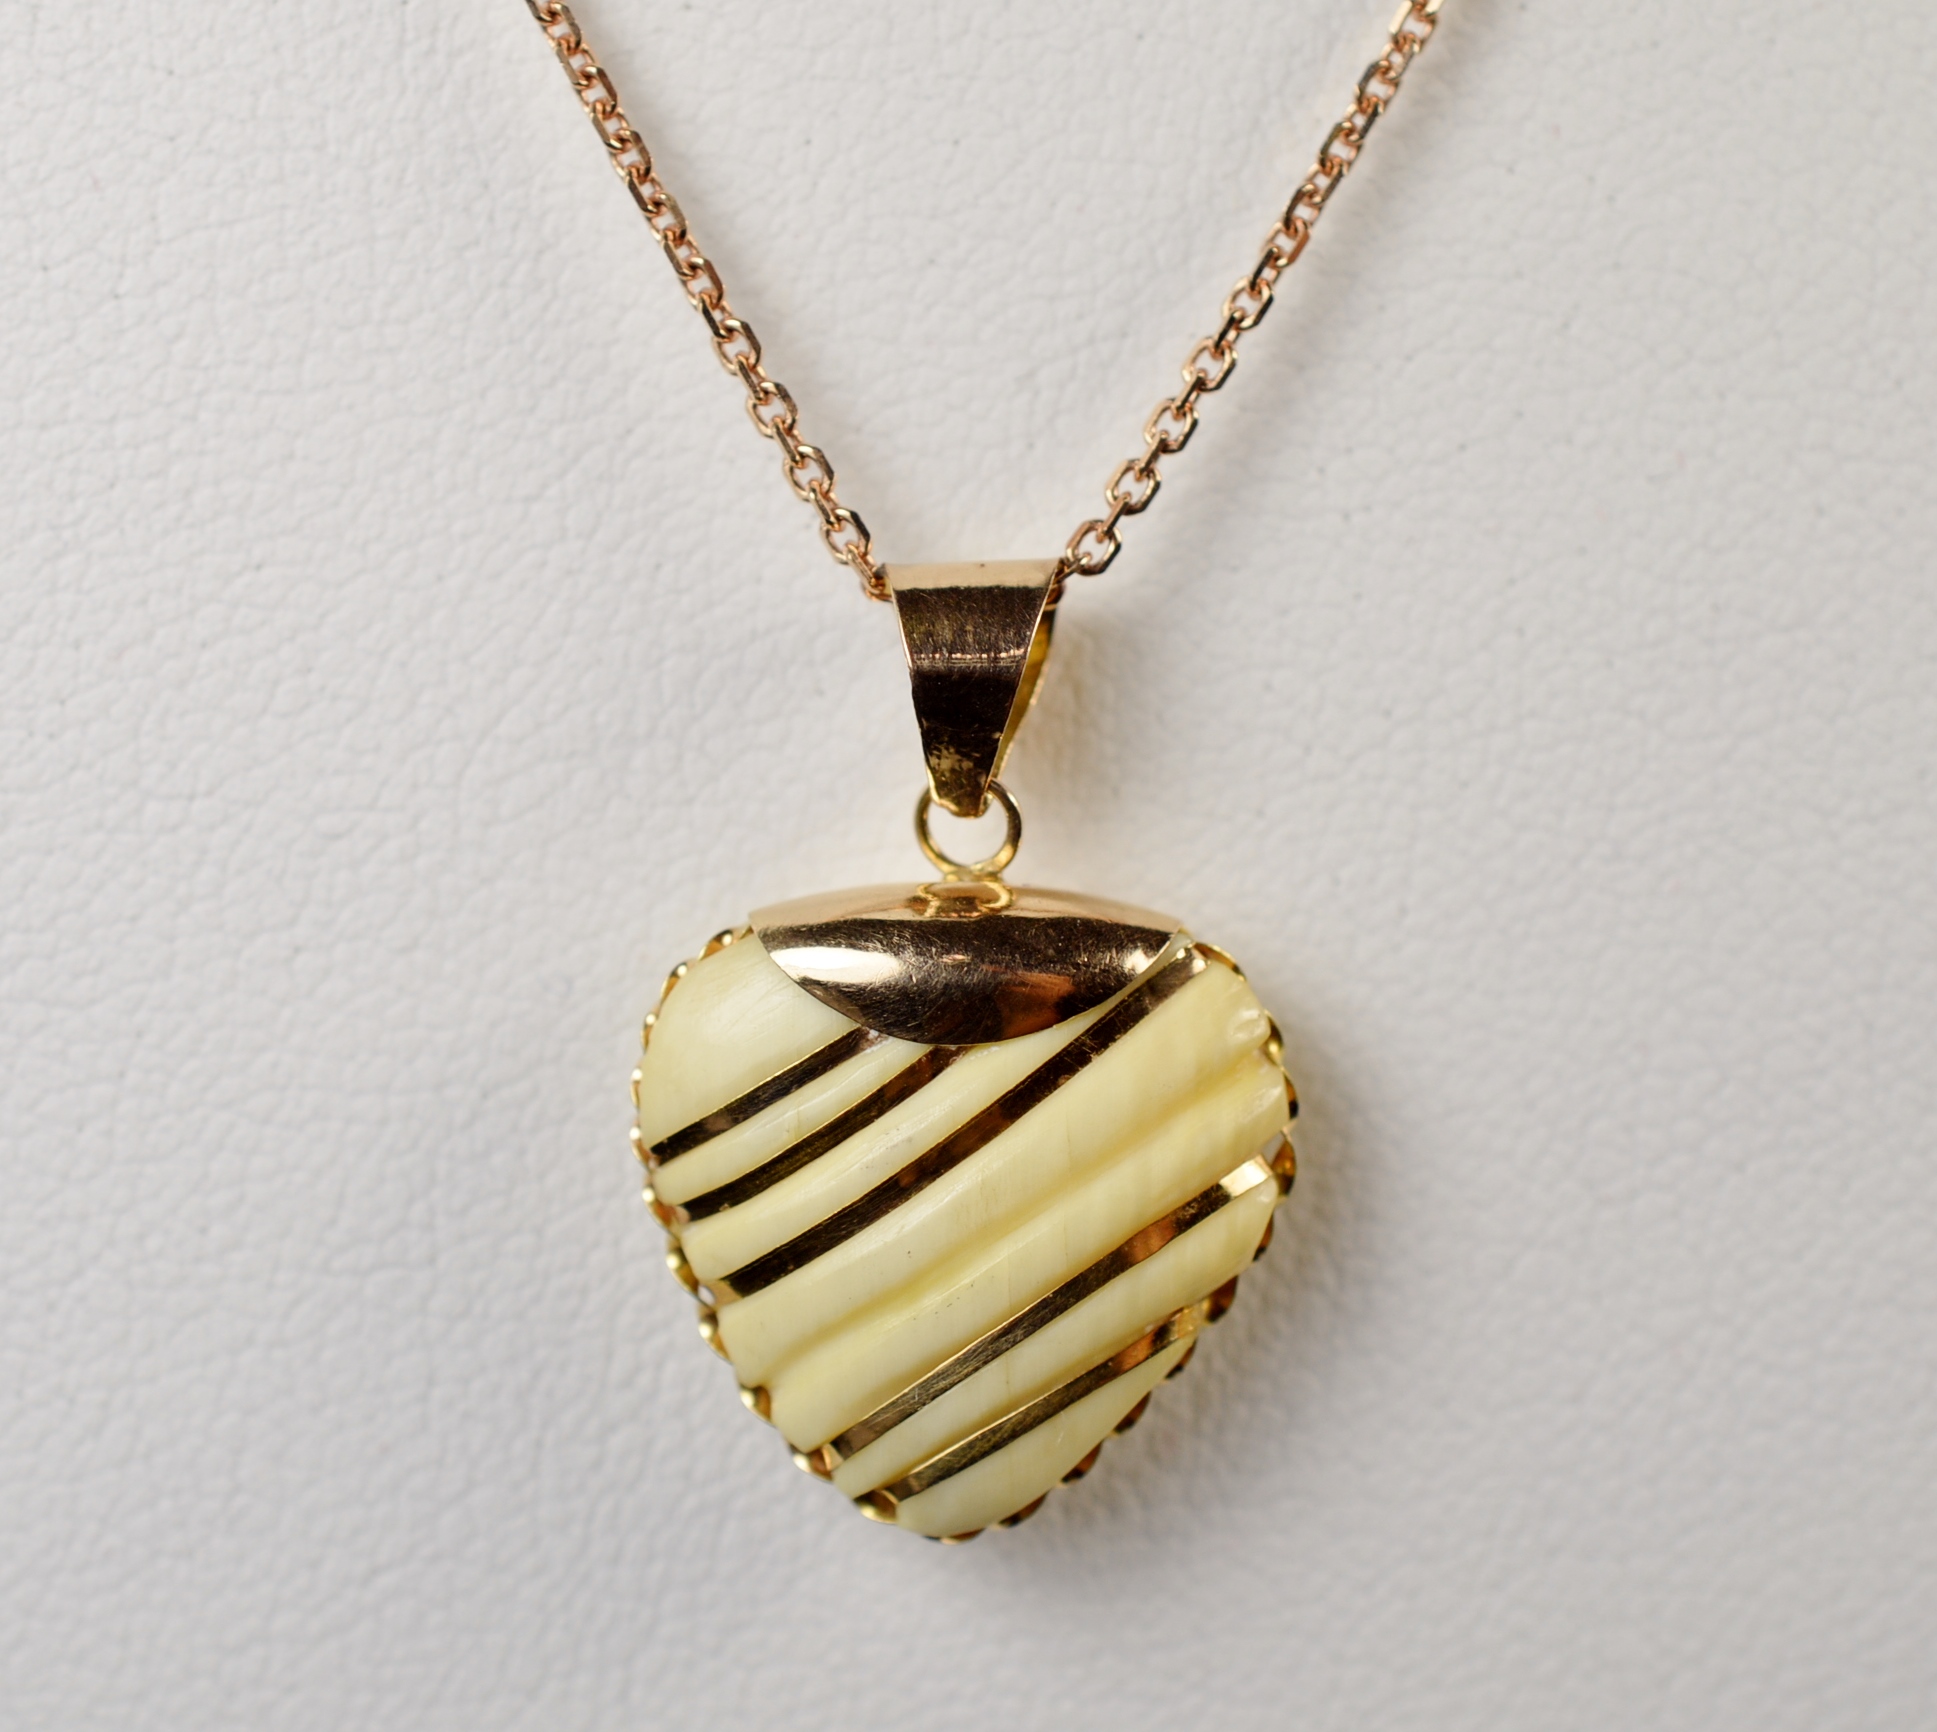 $500 Retail 14K Rose Gold Heart With Gold Stripes Pendant